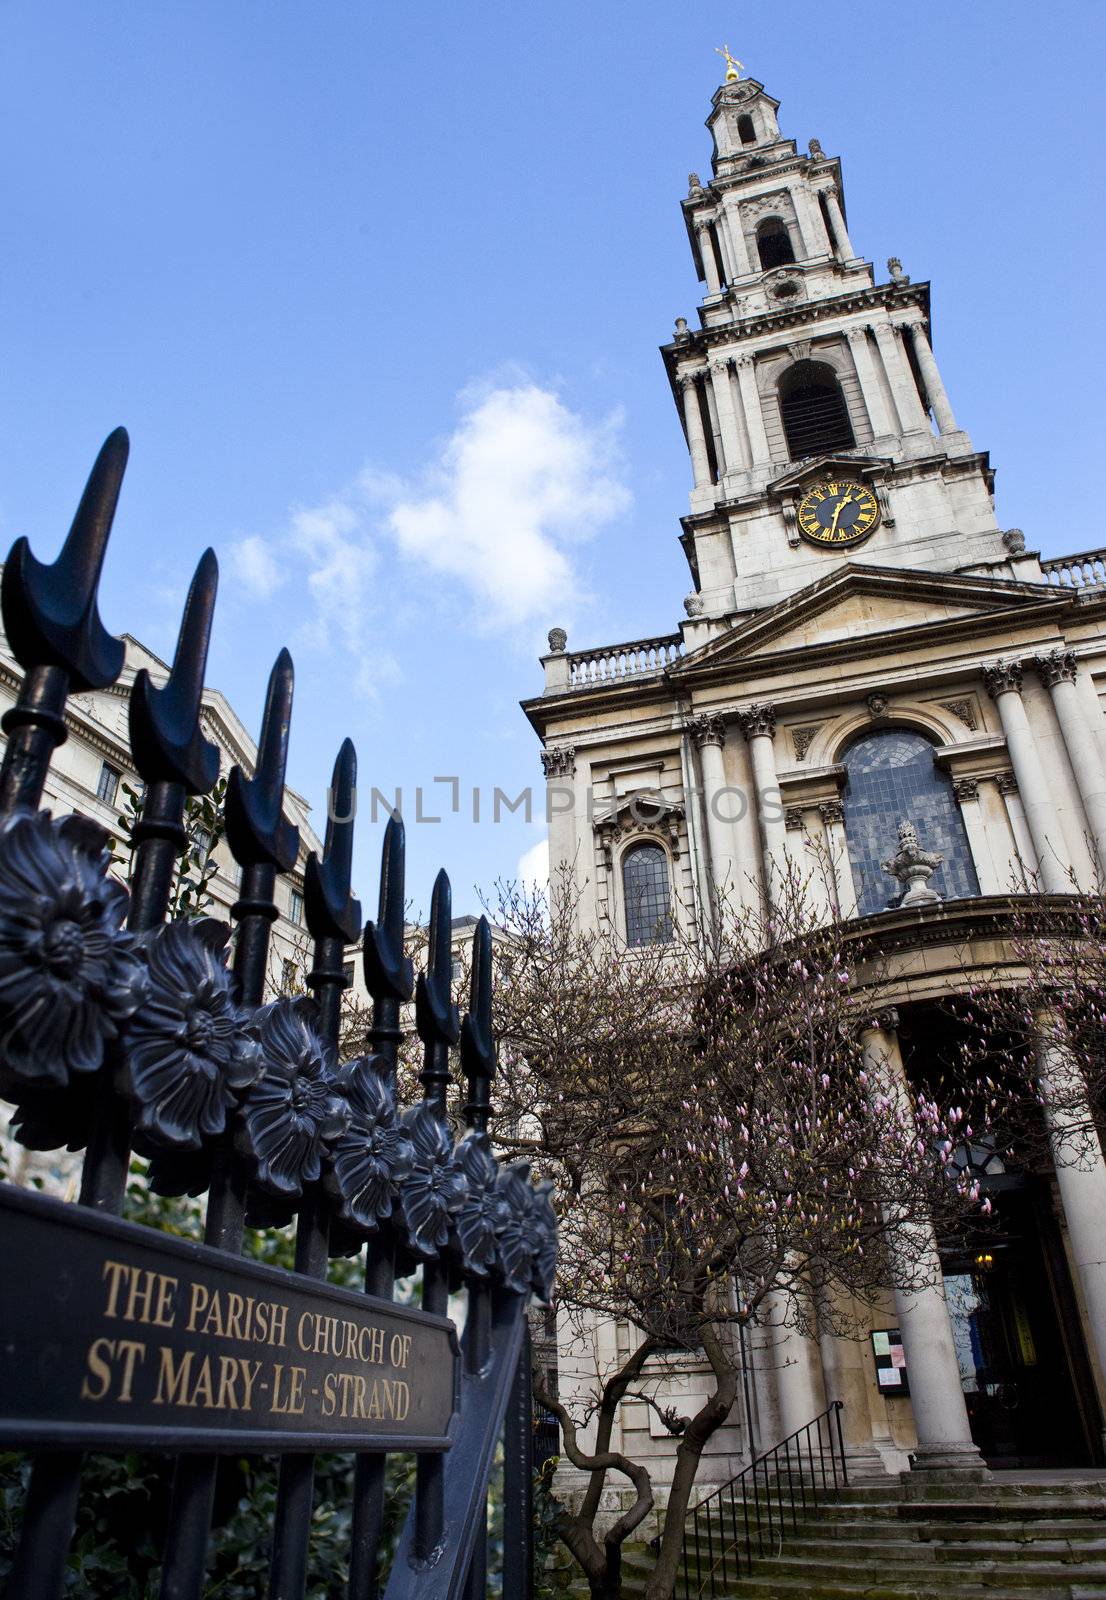 The famous baroque style St-Mary-Le-Strand in London.  Today it is the offical church of the Women's Royal Naval Service.